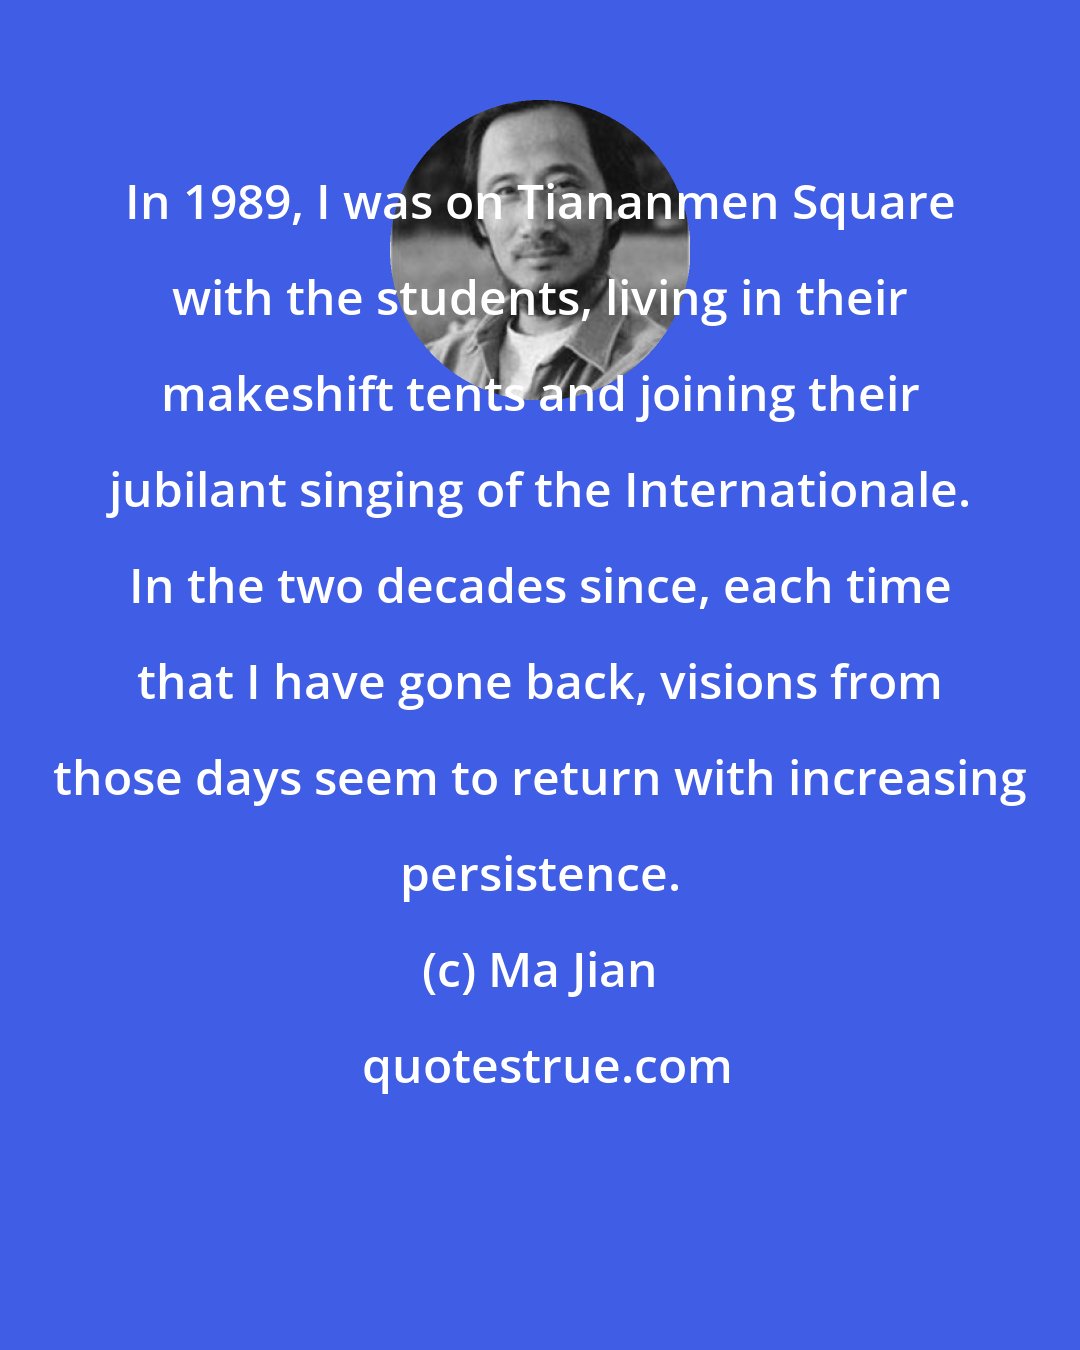 Ma Jian: In 1989, I was on Tiananmen Square with the students, living in their makeshift tents and joining their jubilant singing of the Internationale. In the two decades since, each time that I have gone back, visions from those days seem to return with increasing persistence.